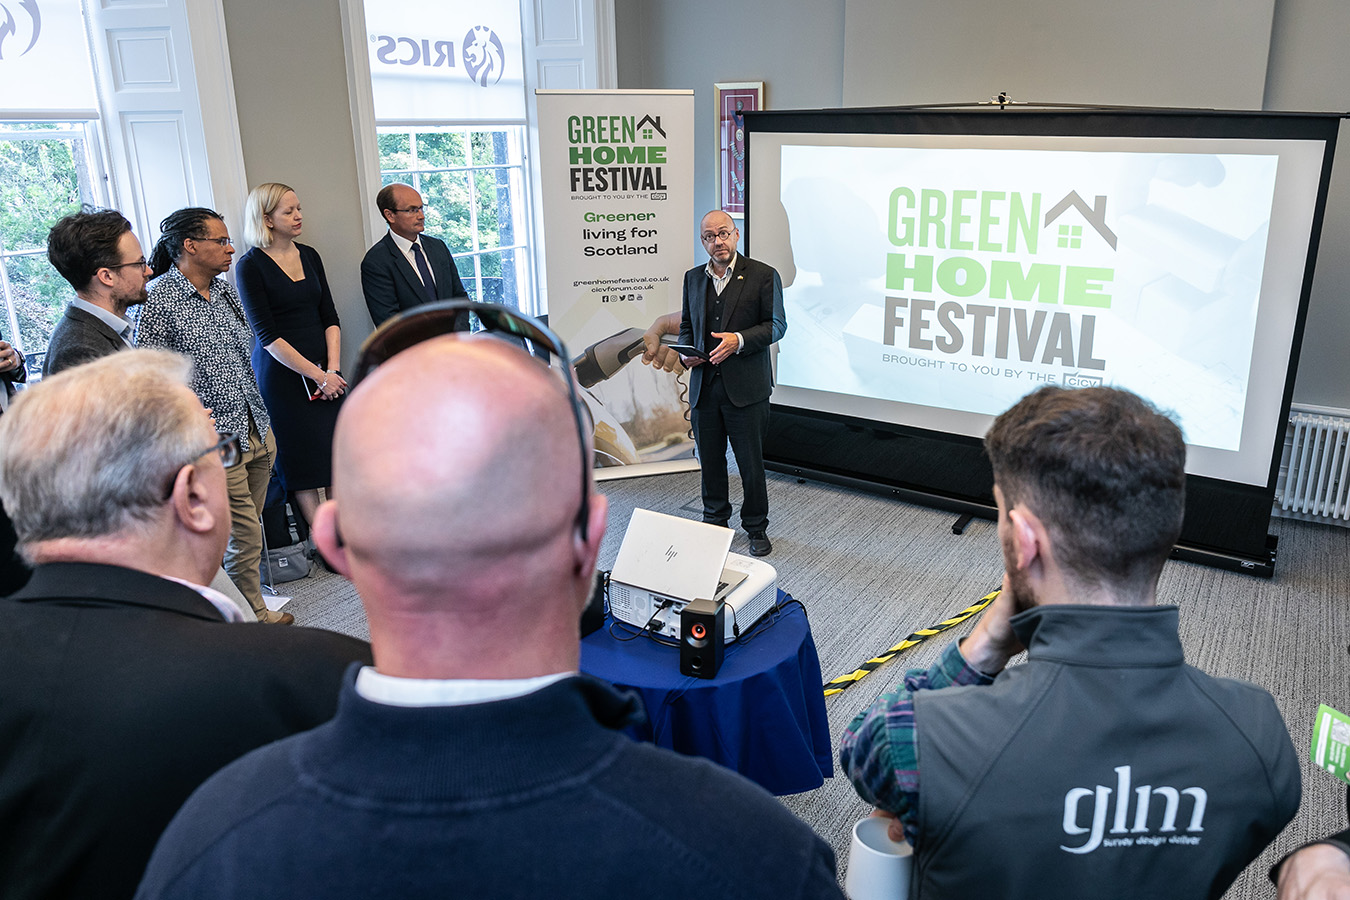 Annual event planned after 'resounding success' of inaugural Green Home Festival